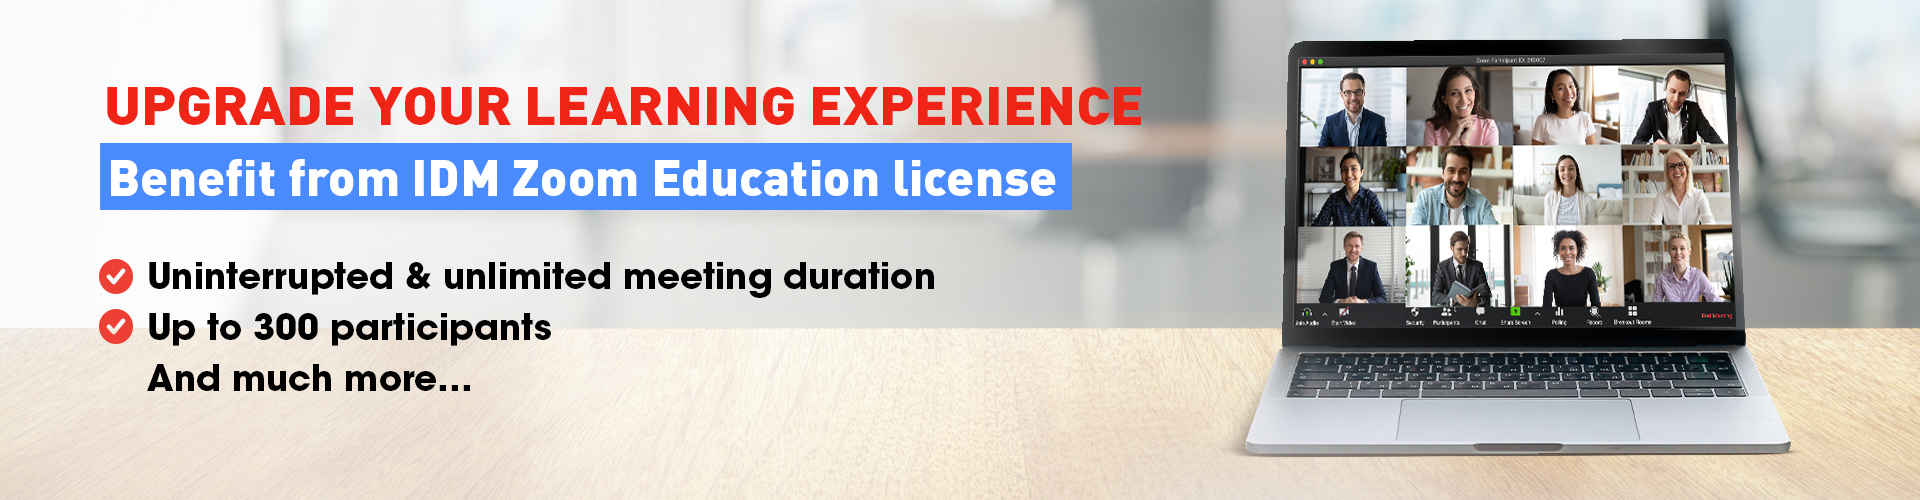 Upgrade your learning experience and Benefit from IDM Zoom Education license